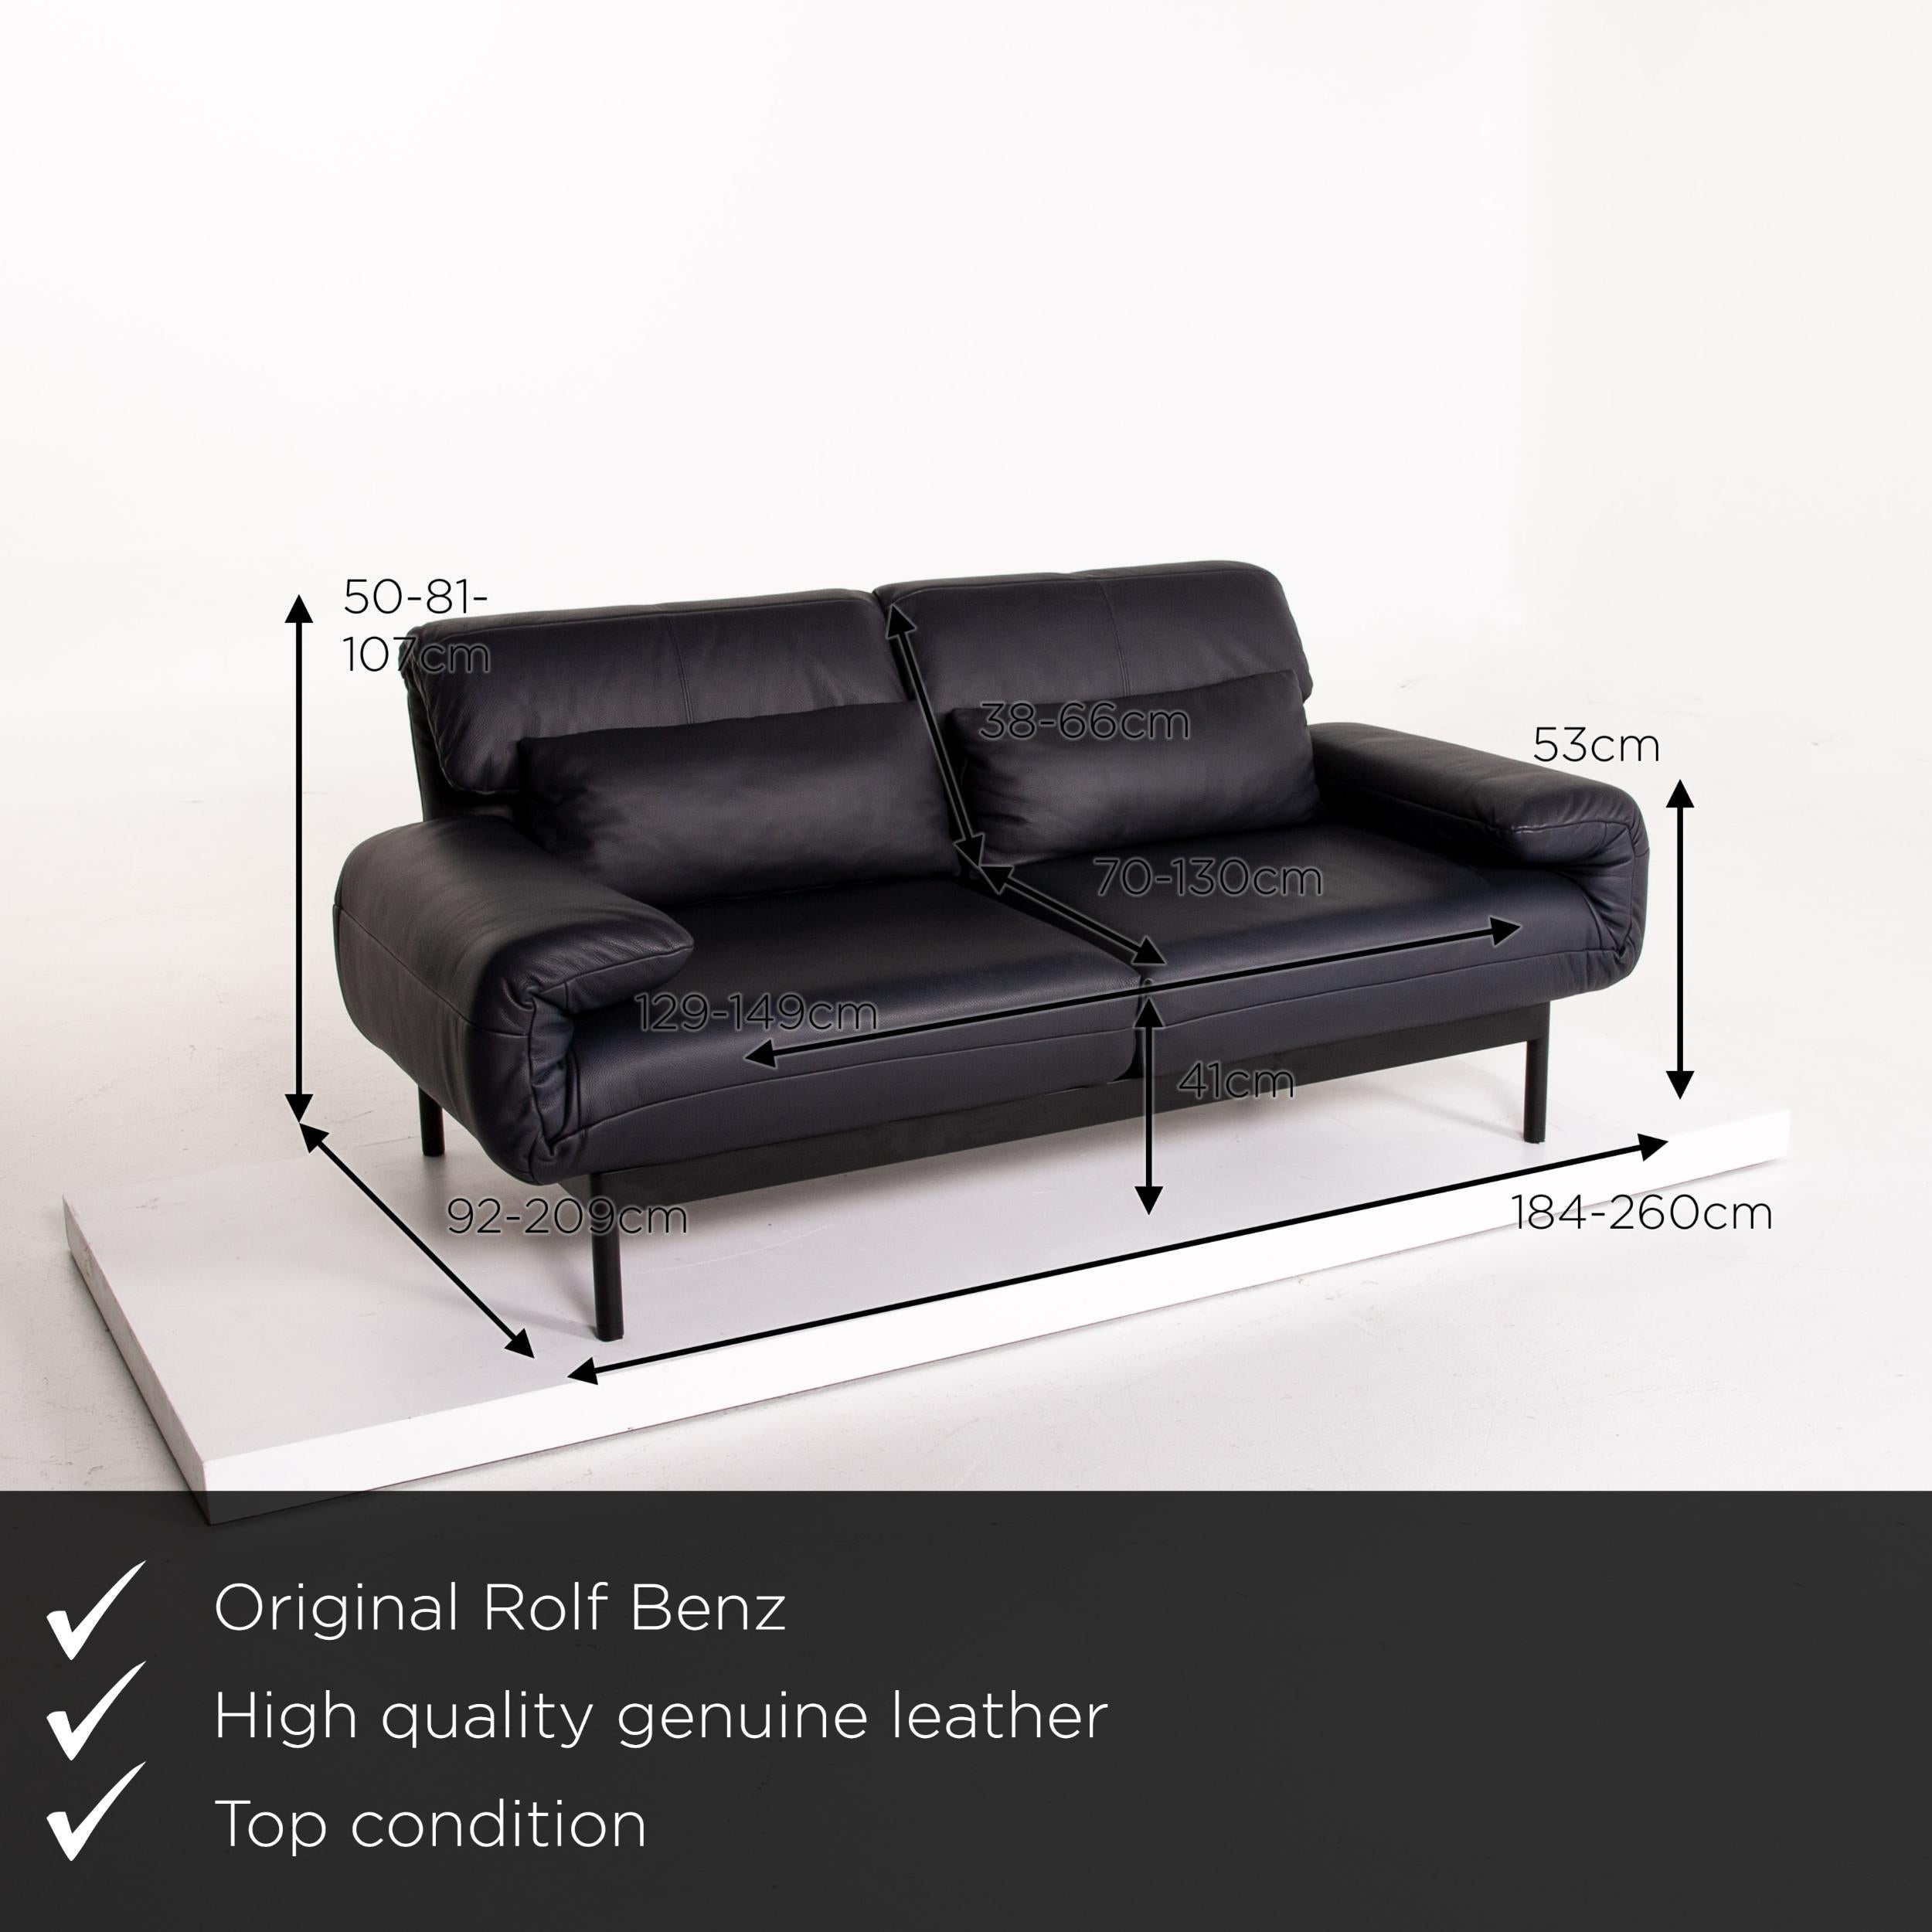 We present to you a Rolf Benz Plura leather sofa dark blue blue two-seat function sofa bed sleep.
   
 

 Product measurements in centimeters:
 

Depth 92
Width 184
Height 50
Seat height 41
Rest height 53
Seat depth 70
Seat width